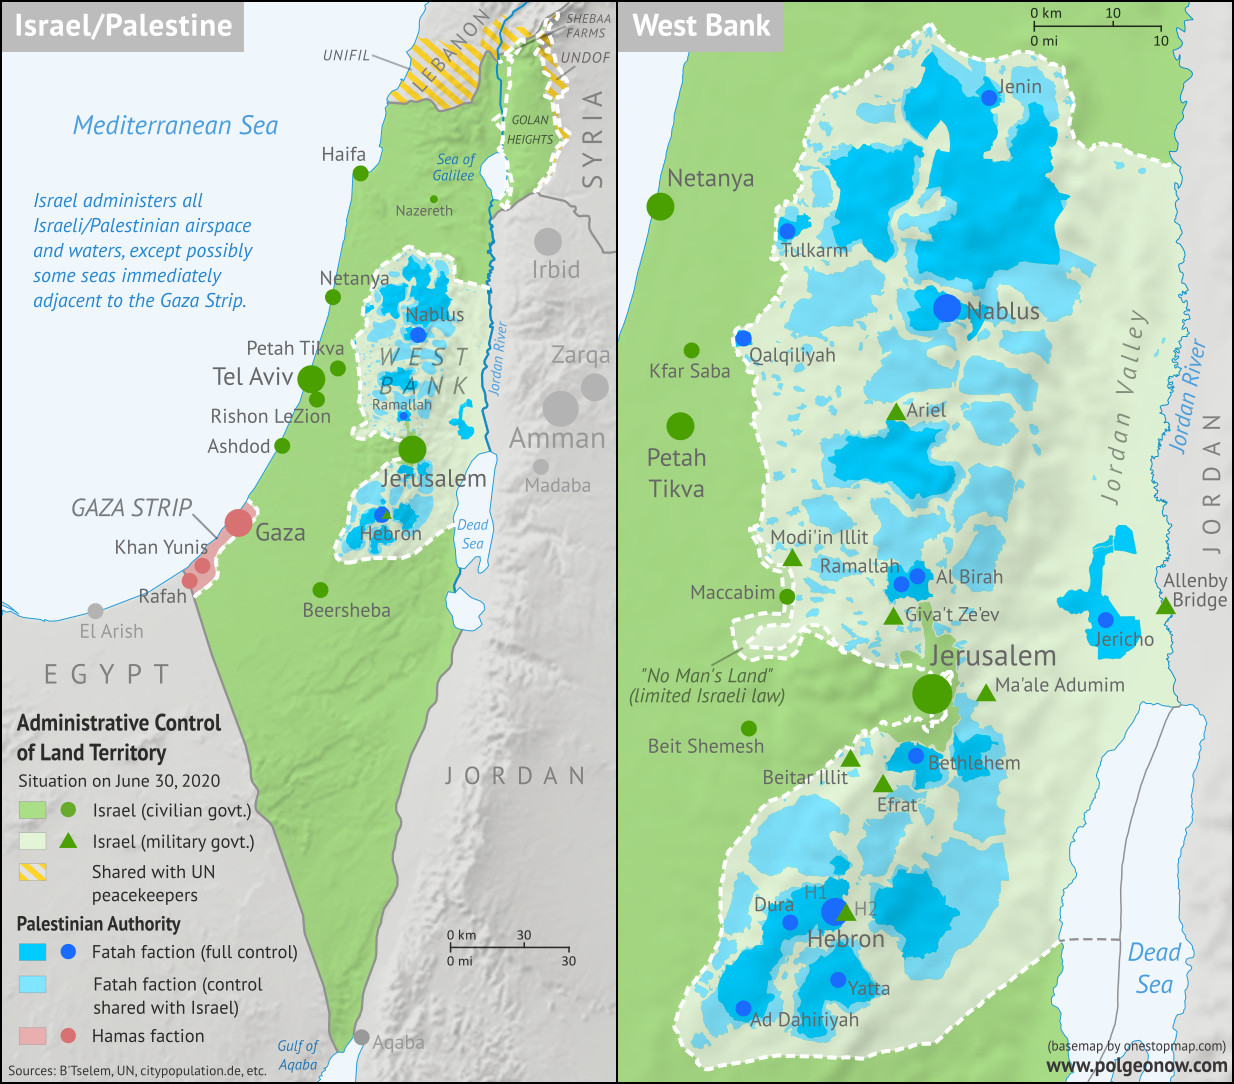 Who controls Palestine and Israel's claimed territories today (June 30, 2020), just before Israel's planned annexation of parts of the West Bank? Also file under: Palestine controlled area map. Includes bigger West Bank map (Areas A, B, C). Map also includes Gaza Strip, Golan Heights, major cities and Israeli settlements, UN peacekeeper deployments (UNIFIL and UNDOF), no man's land, Golan Heights buffer zone (area of separation, AOS), and Shebaa Farms. Colorblind accessible.